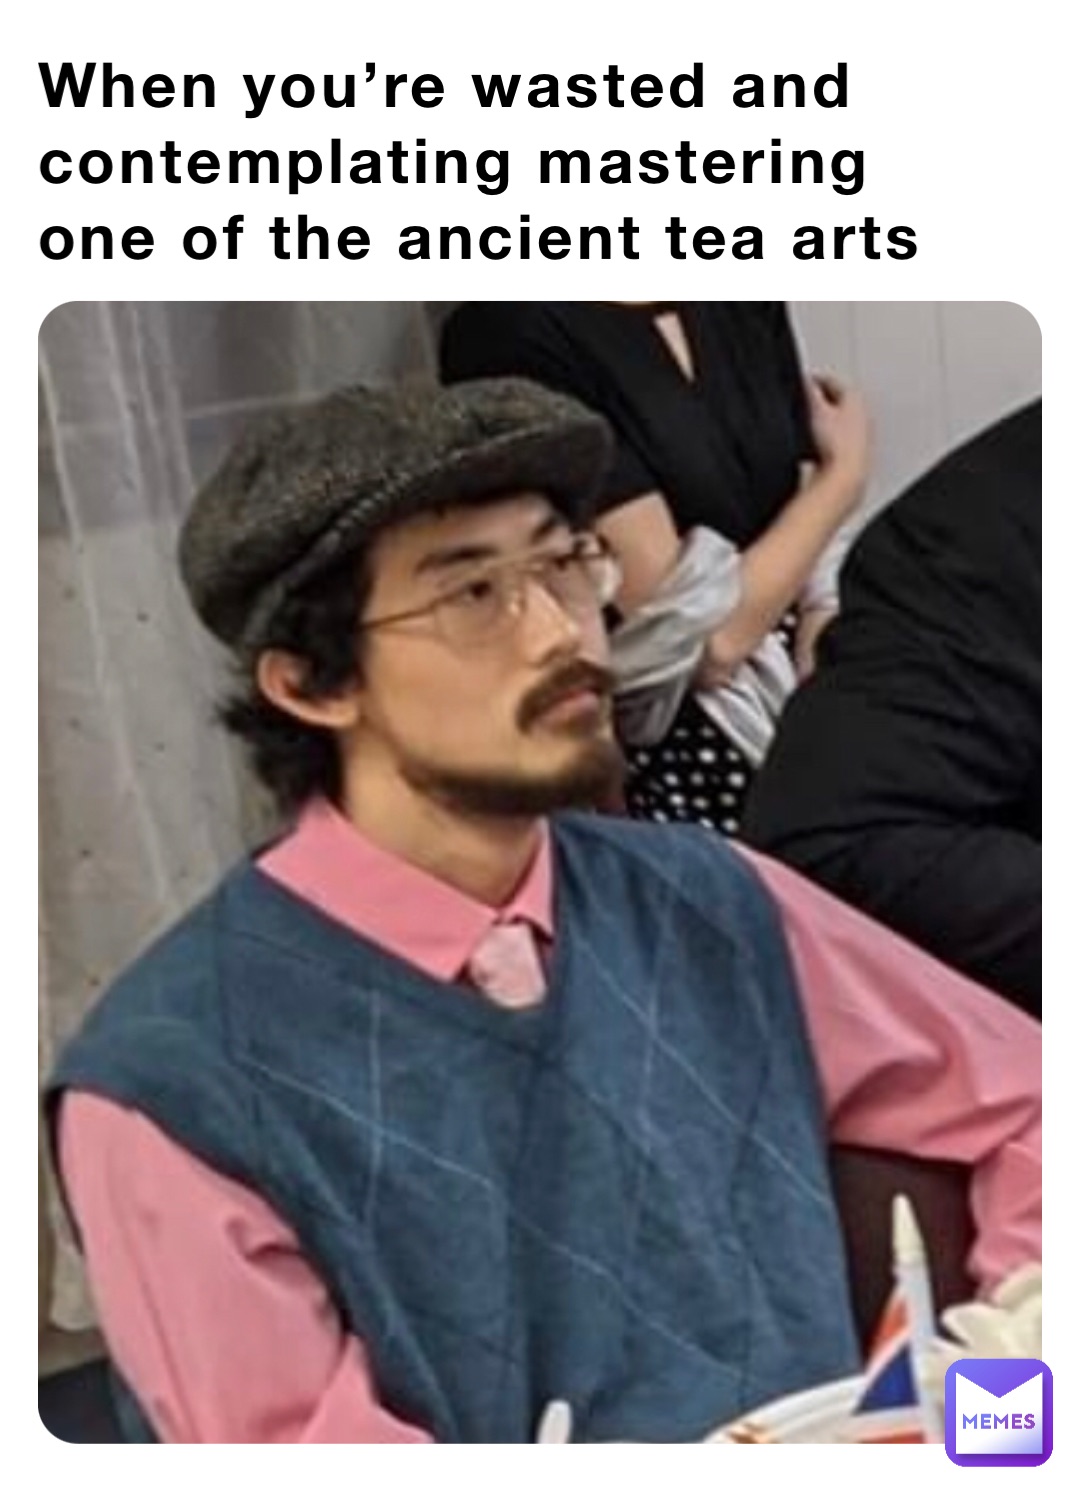 When you’re wasted and contemplating mastering one of the ancient tea arts